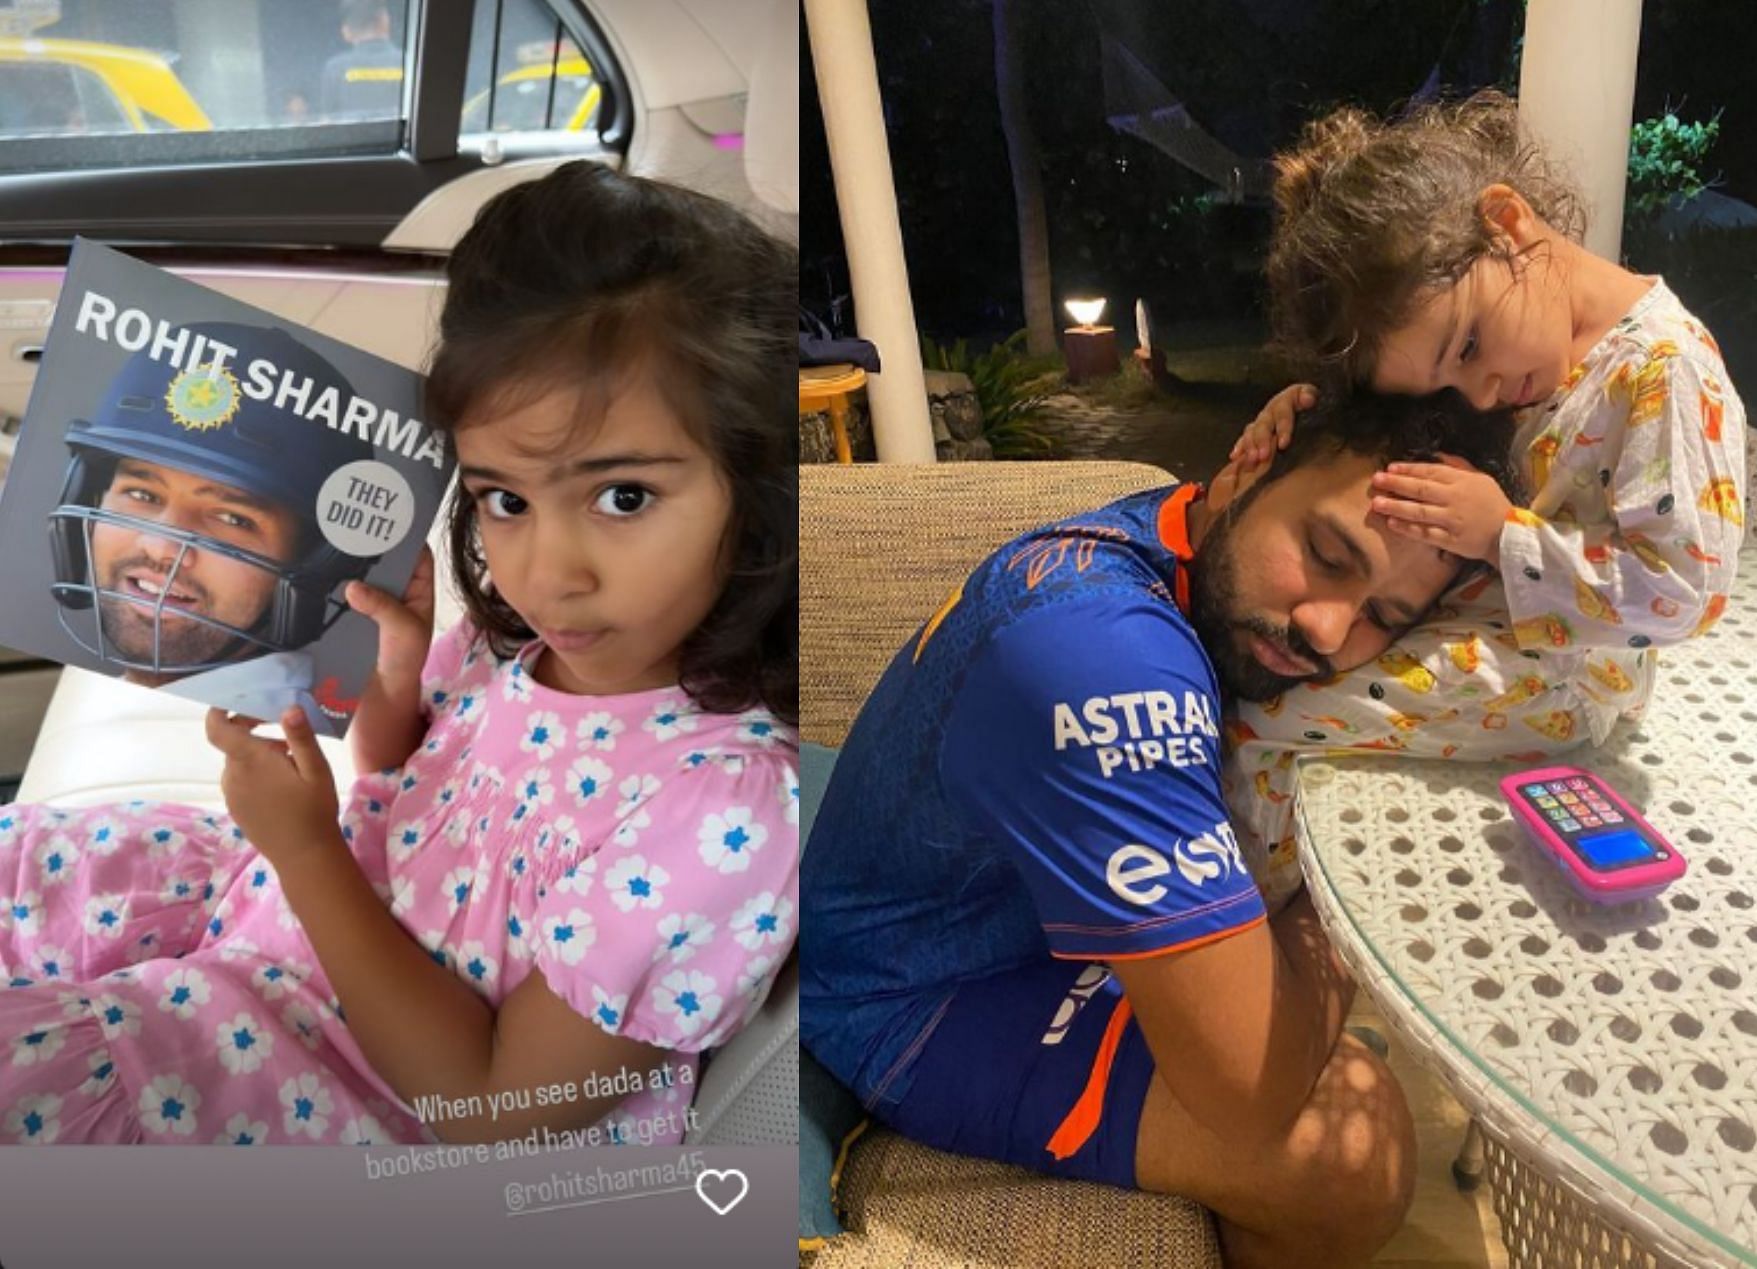 IND vs WI 2022: “When you see dada at a bookstore” - Rohit Sharma’s daughter purchases book on cricketer; Ritika Sajdeh shares cute picture